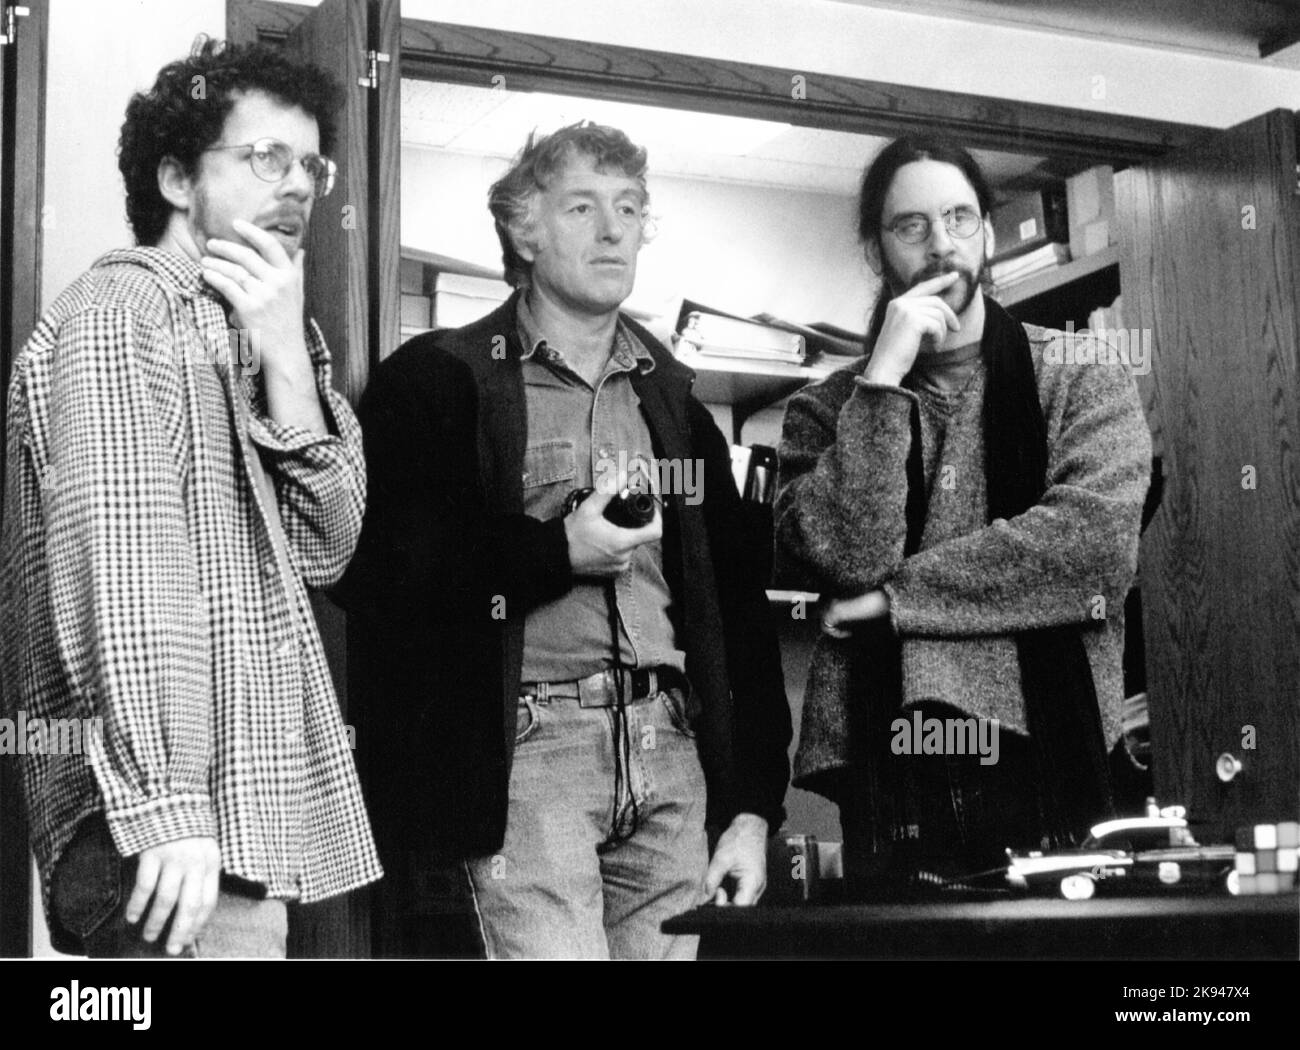 Producer / Screenwriter ETHAN COEN Cinematographer ROGER DEAKINS and Director / Screenwriter JOEL COEN on set candid during filming of FARGO 1996 director / writers JOEL and ETHAN COEN music Carter Burwell PolyGram Filmed Entertainment / Working Title Films / Gramercy Pictures Stock Photo